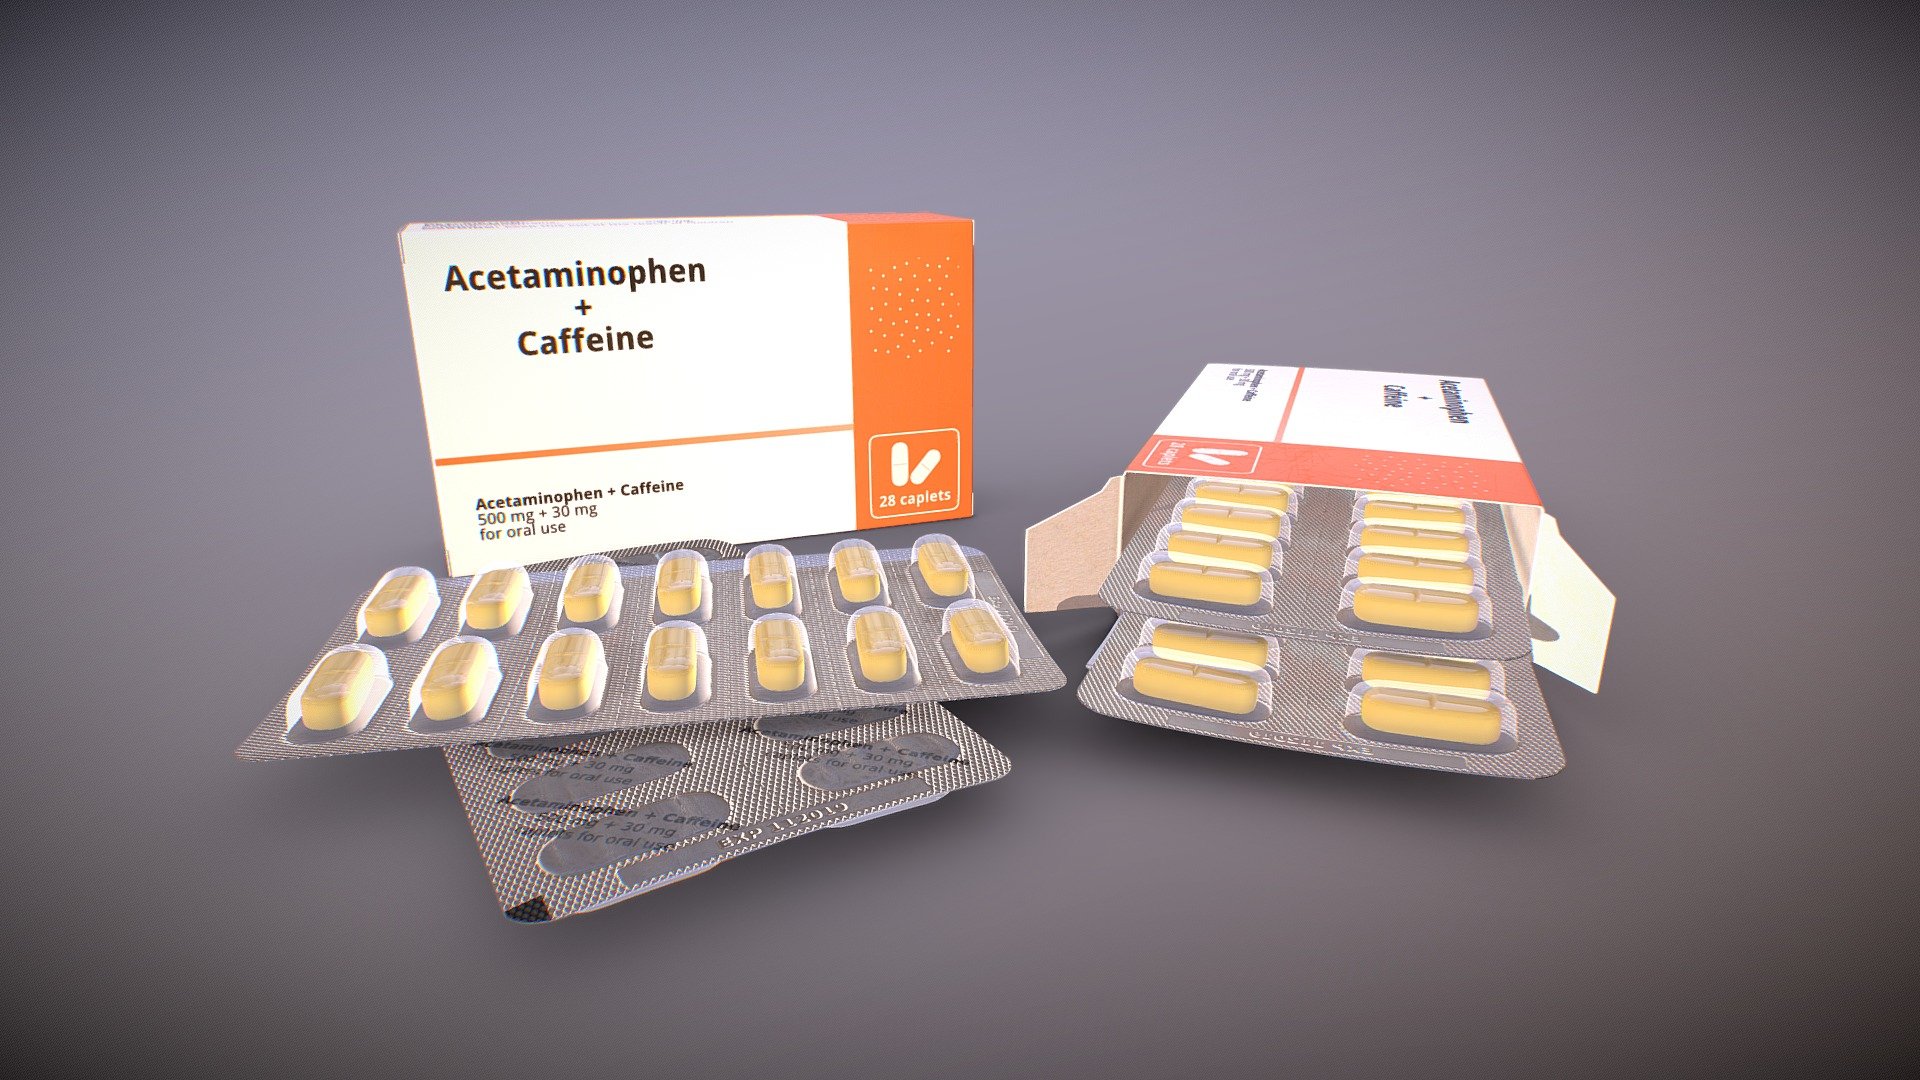 Medicine Package

Realistic, rigged model of a Medication Blister Package, Blister and Pills




Native format is Blender3D *.blend!

Scene ready to render in Blender3D

There is also PBR textures used in sketchfab's viewer

FBX, DAE and OBJ formats also available.

Realistic model, ideal for closeups

Clean geometry, quads only, UV unwrapped

Real World Scale

Units: metric

Package Dimensions: 13.28 x 7.83 x 2.53cm

Blister Dimensions: 9.82 x 5.65cm

Pill Dimensions: 15.7 x 6.0 x 4.6mm

Materials and textures included.

Configurable Materials

Blister model has armature rig.

Package model has armature rig.

Polygonal count at optimal subdivision levels:

level 2 for the blister

level 1 for the package

level 1 for the pills

Package 9192 faces

Blister 15904 faces

Each Pill 1848 faces

Default Scene has 92744 faces

Blend file has packed textures

Enjoy!
Thank You! - Medicine Package - 3D model by nacl 3d model